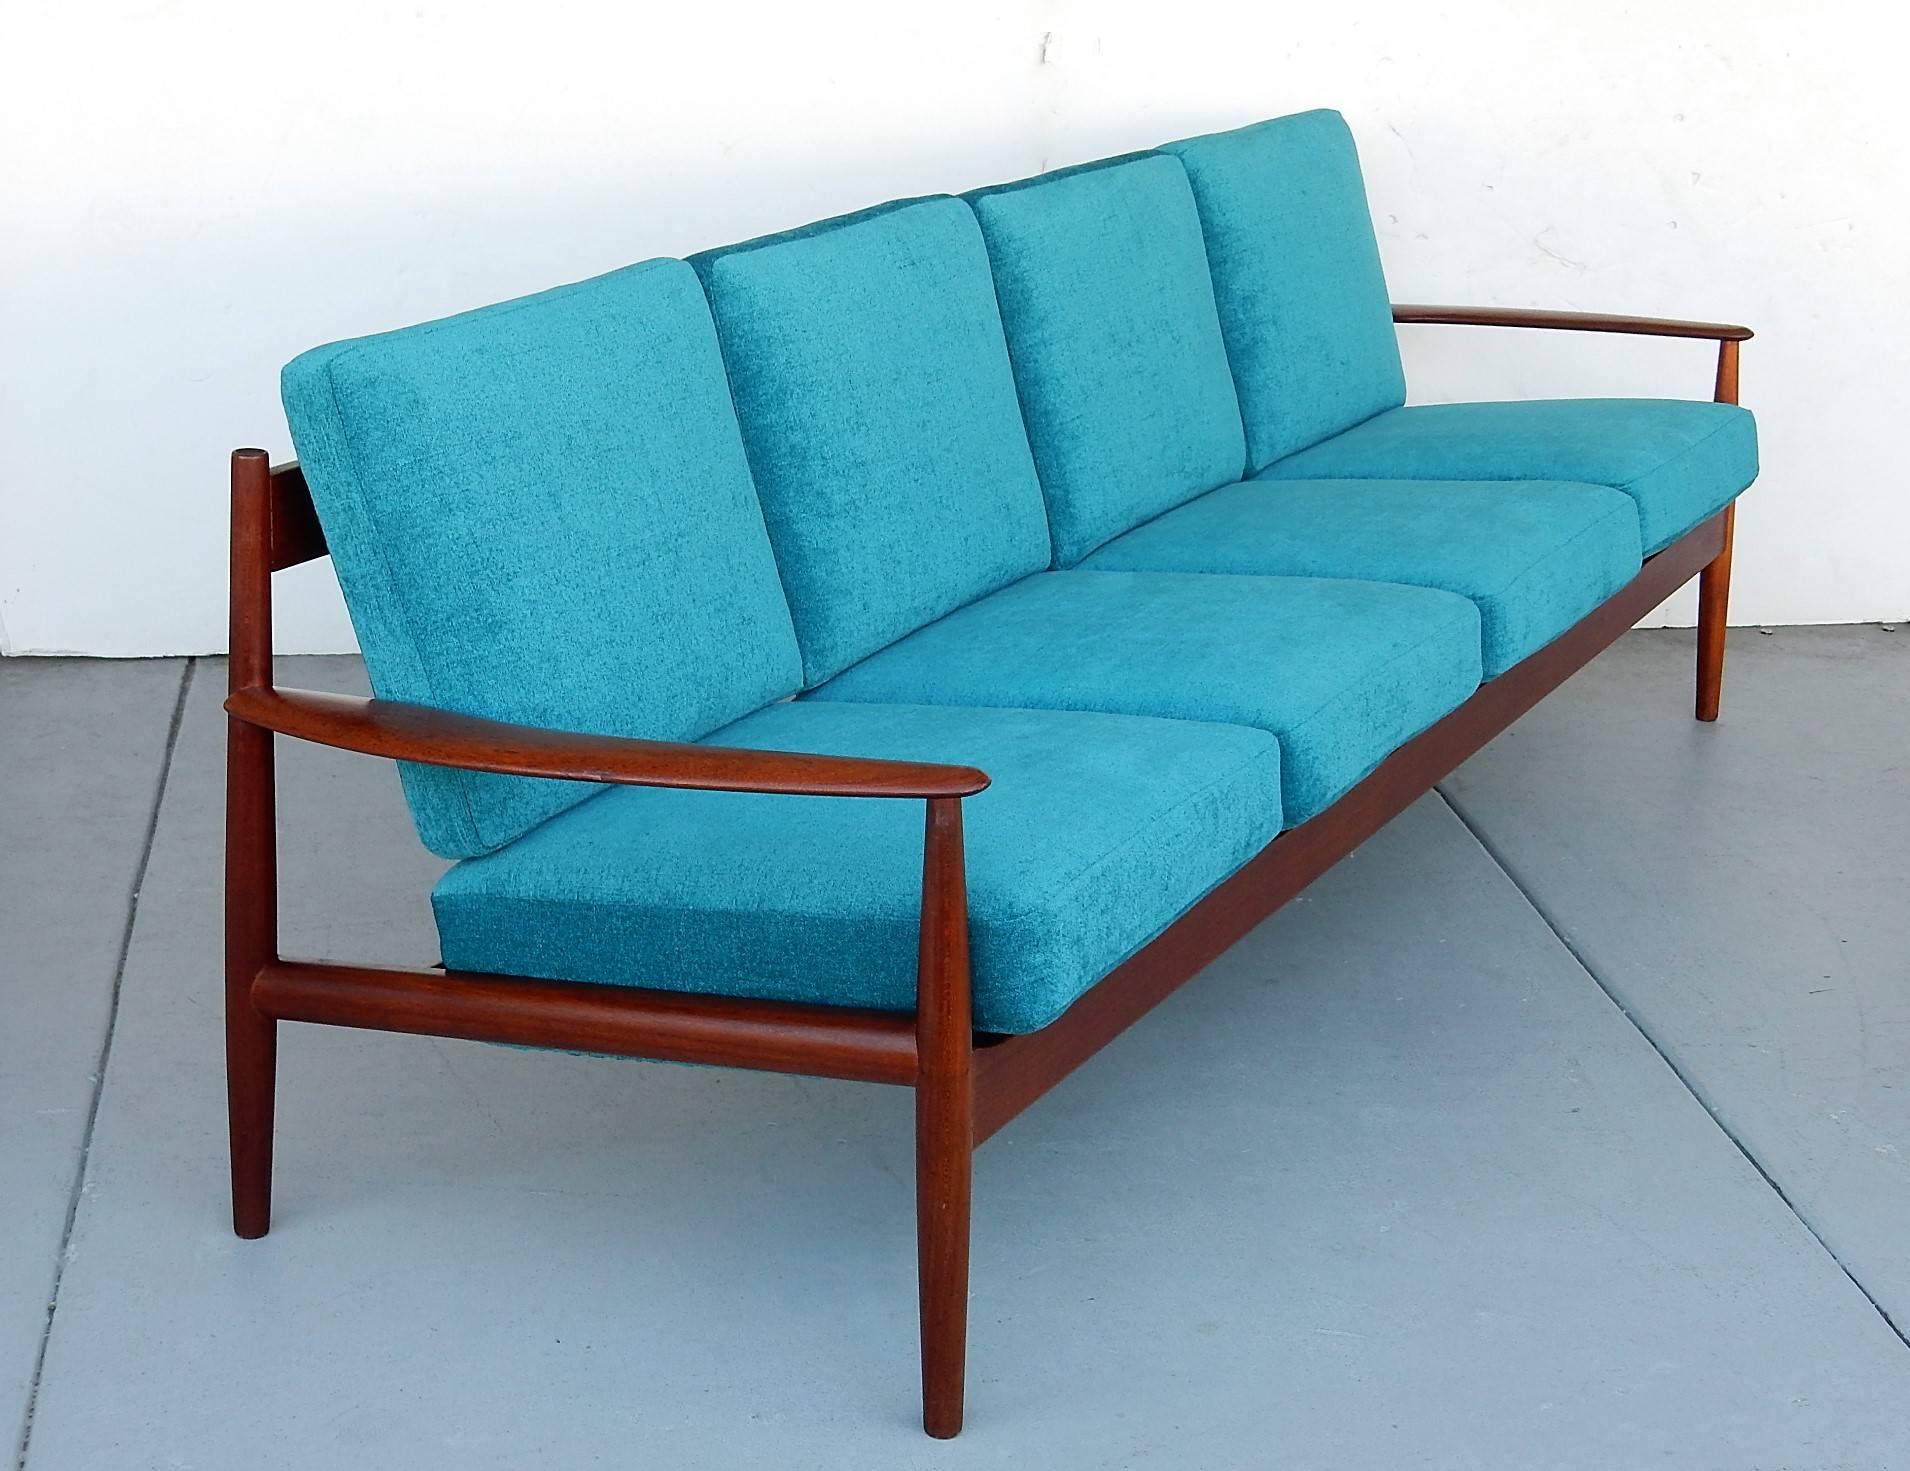 An early example of the Classic Grete Jalk sofa. Solid teak frame with new turquoise chenille upholstery. Retains the original spring cushions.